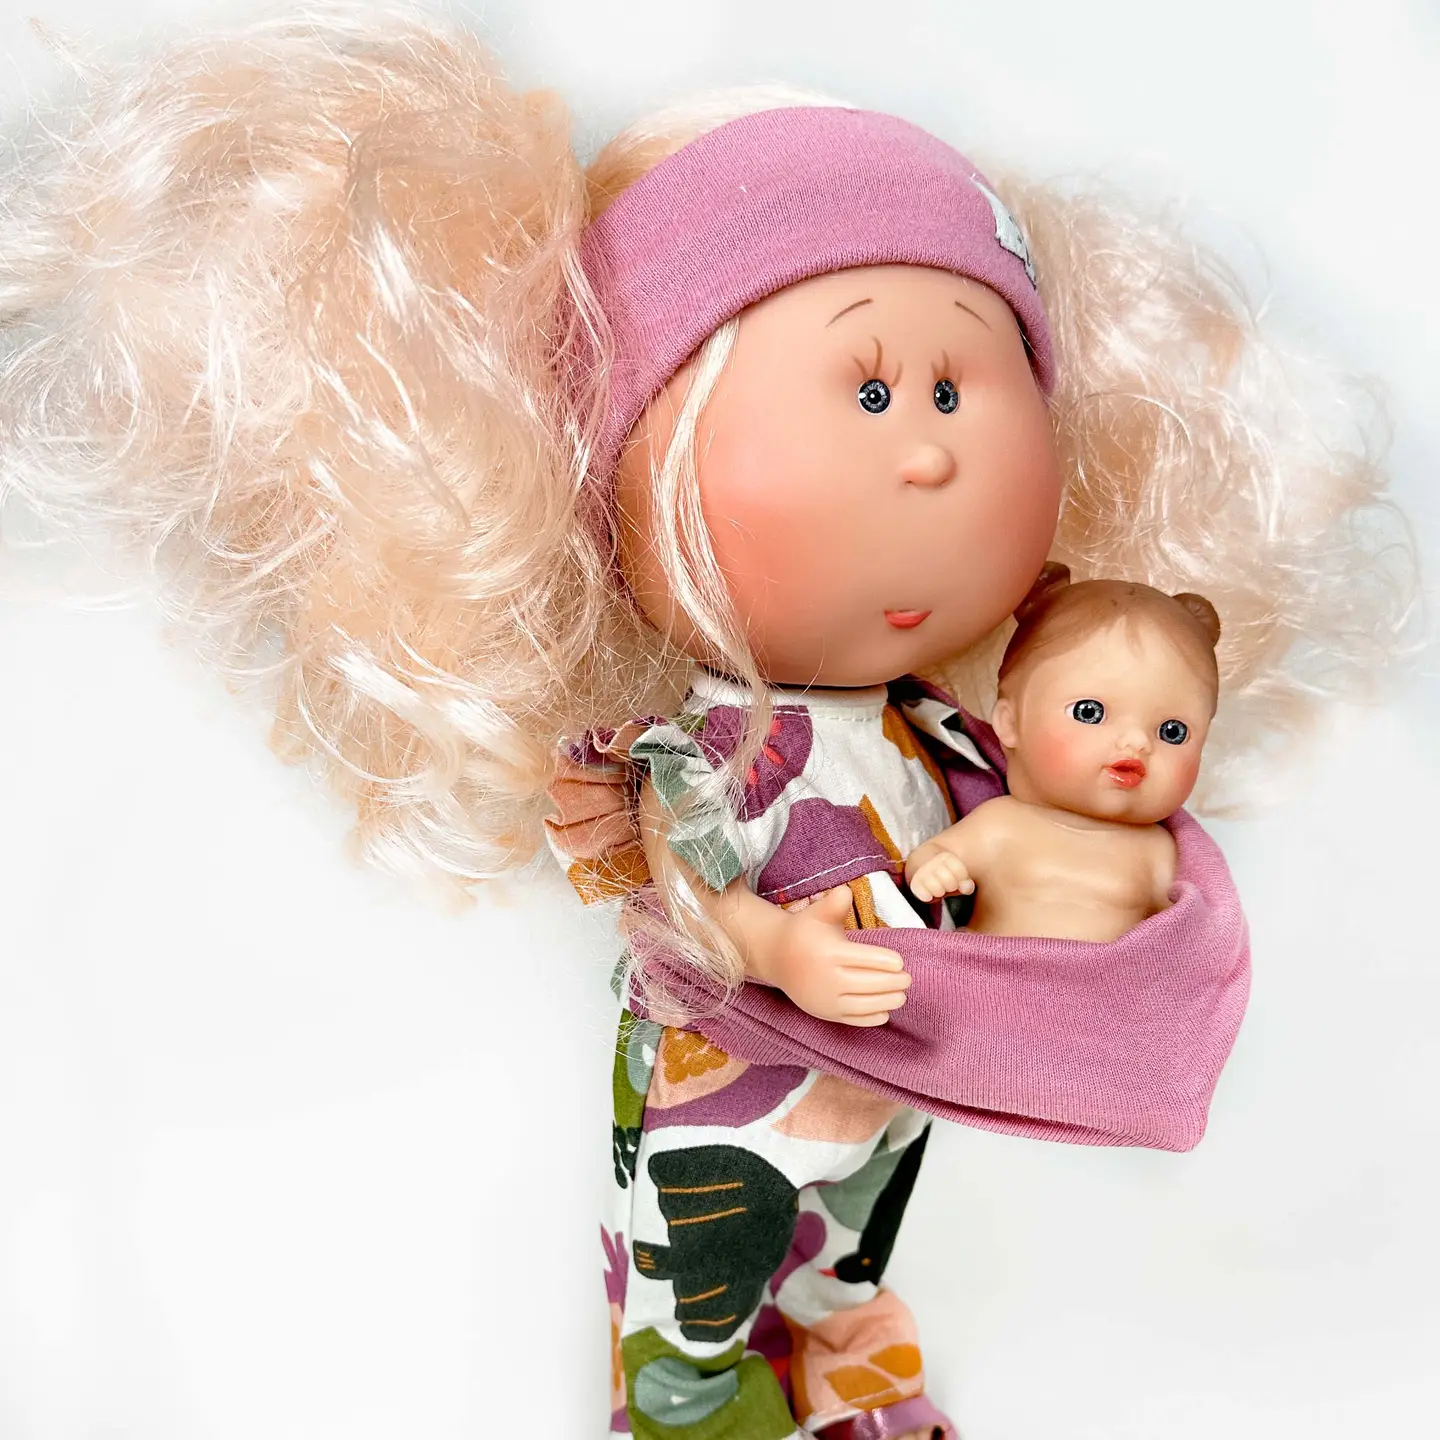 Mom Mia Doll with Baby Blonde